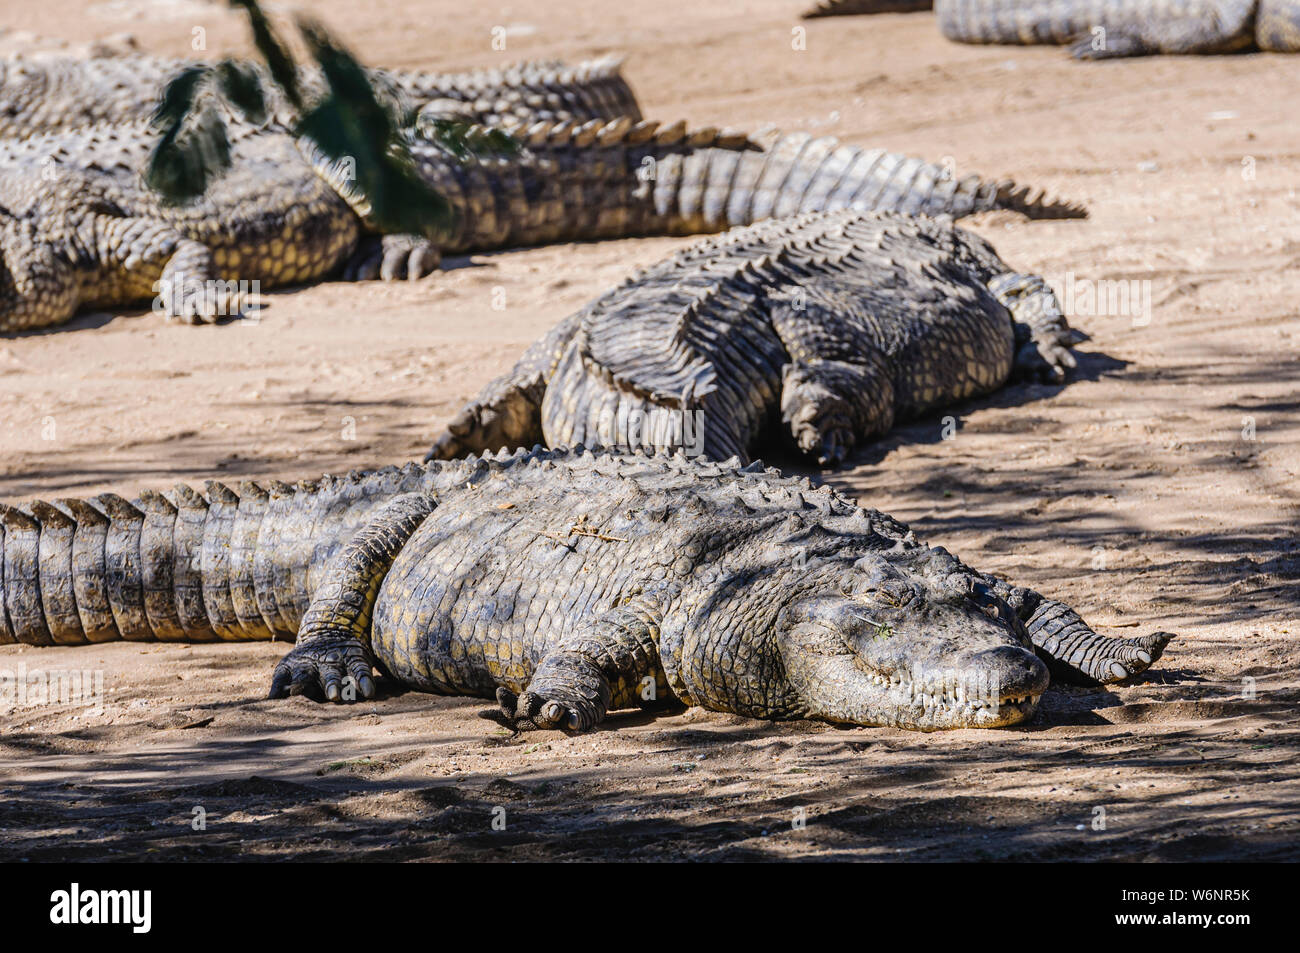 Many Nile Crocodiles (Crocodylus niloticus) sunning themselves on the sandy bank of a river. Stock Photo